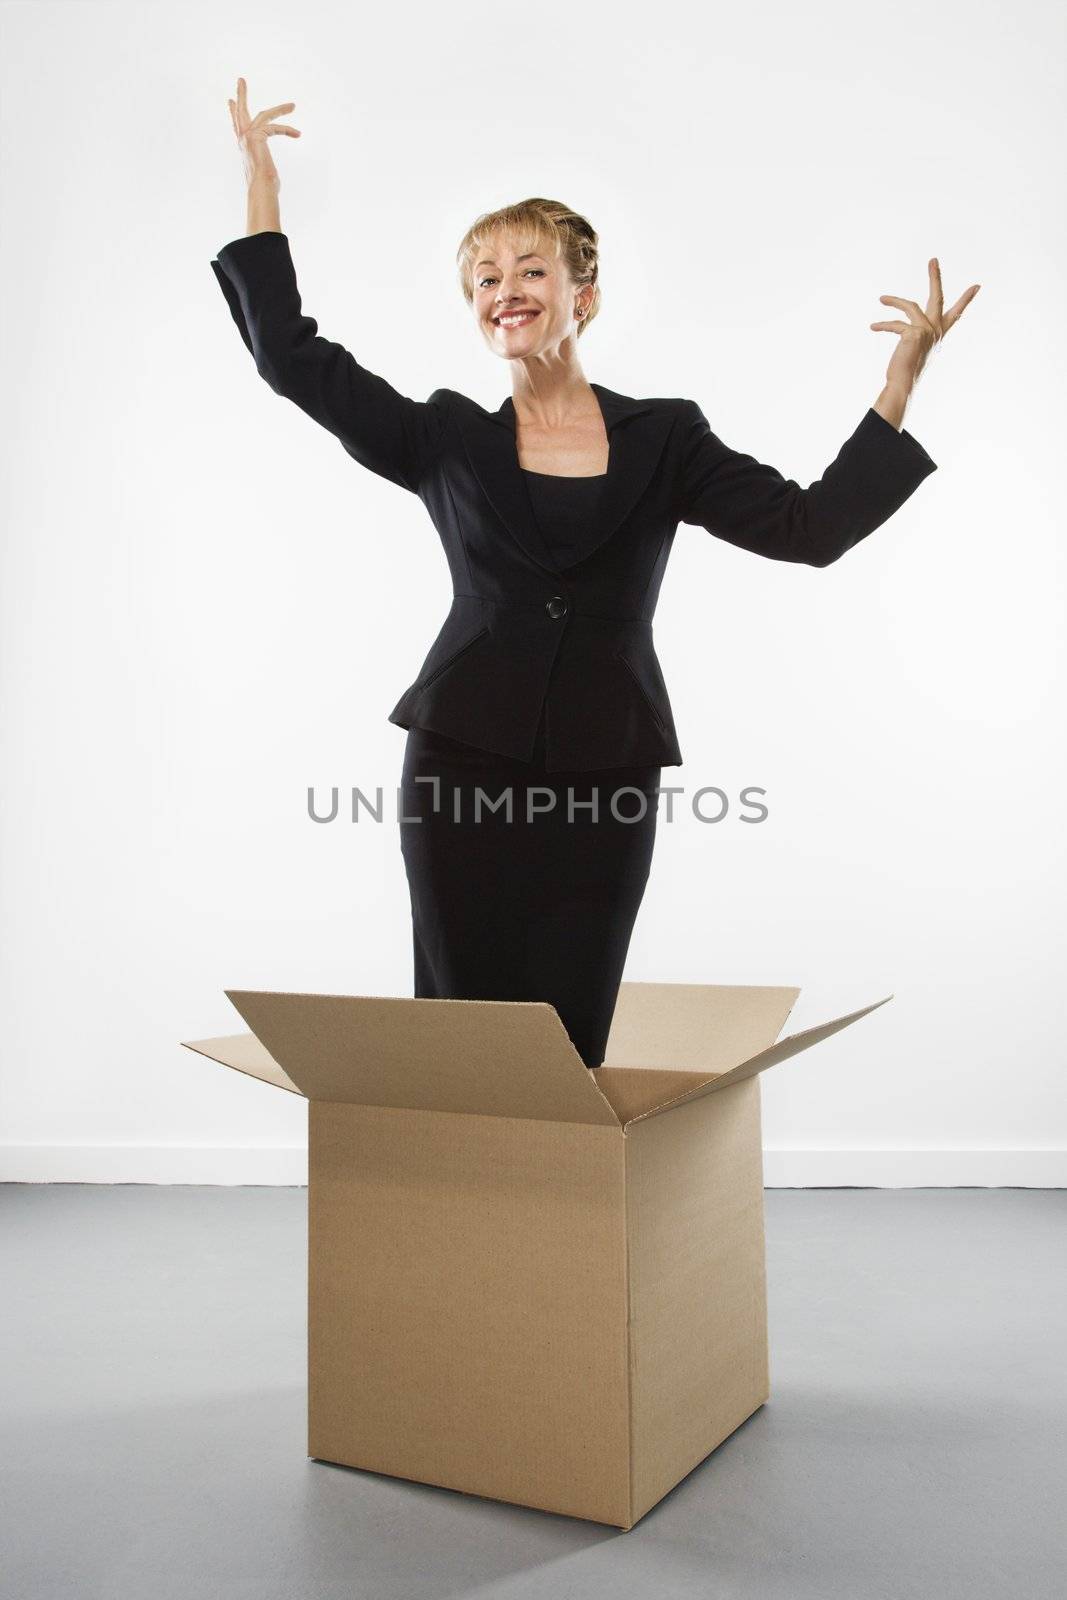 Caucasian businesswoman standing in cardboard box gesturing above head and smiling at viewer.